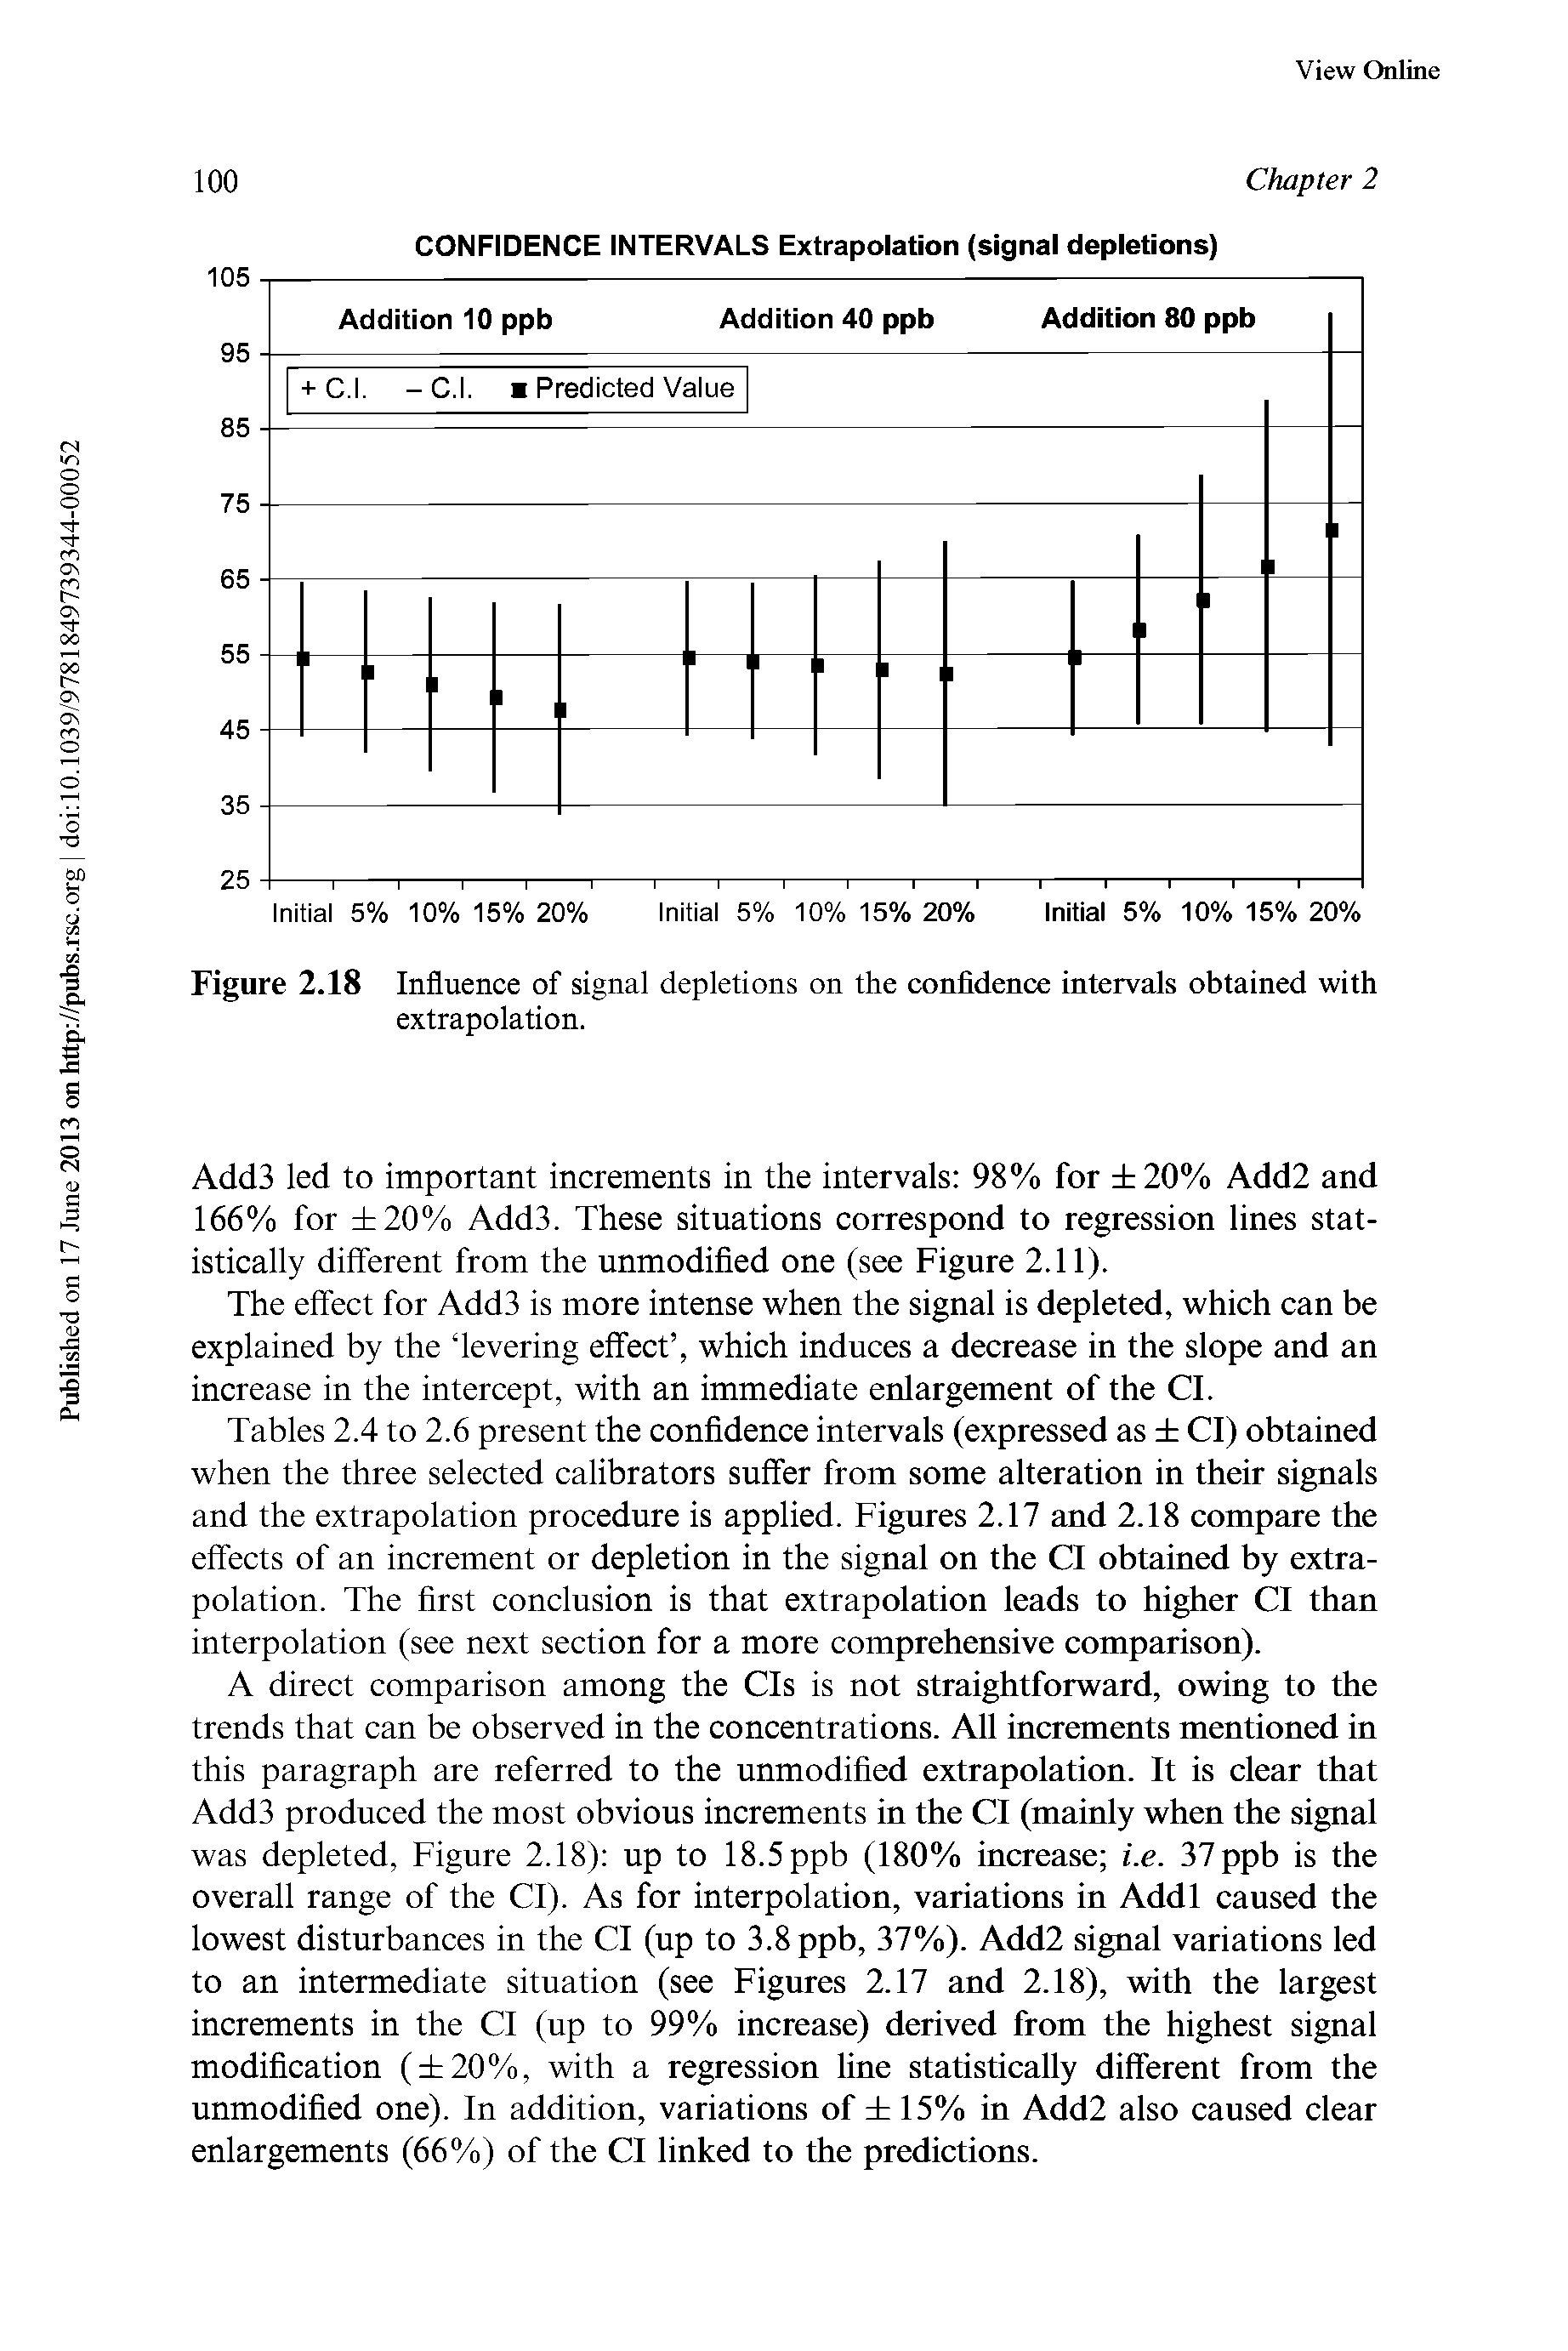 Tables 2.4 to 2.6 present the confidence intervals (expressed as Cl) obtained when the three selected calibrators suffer from some alteration in their signals and the extrapolation procedure is applied. Figures 2.17 and 2.18 compare the effects of an increment or depletion in the signal on the Cl obtained by extrapolation. The first conclusion is that extrapolation leads to higher Cl than interpolation (see next section for a more comprehensive comparison).